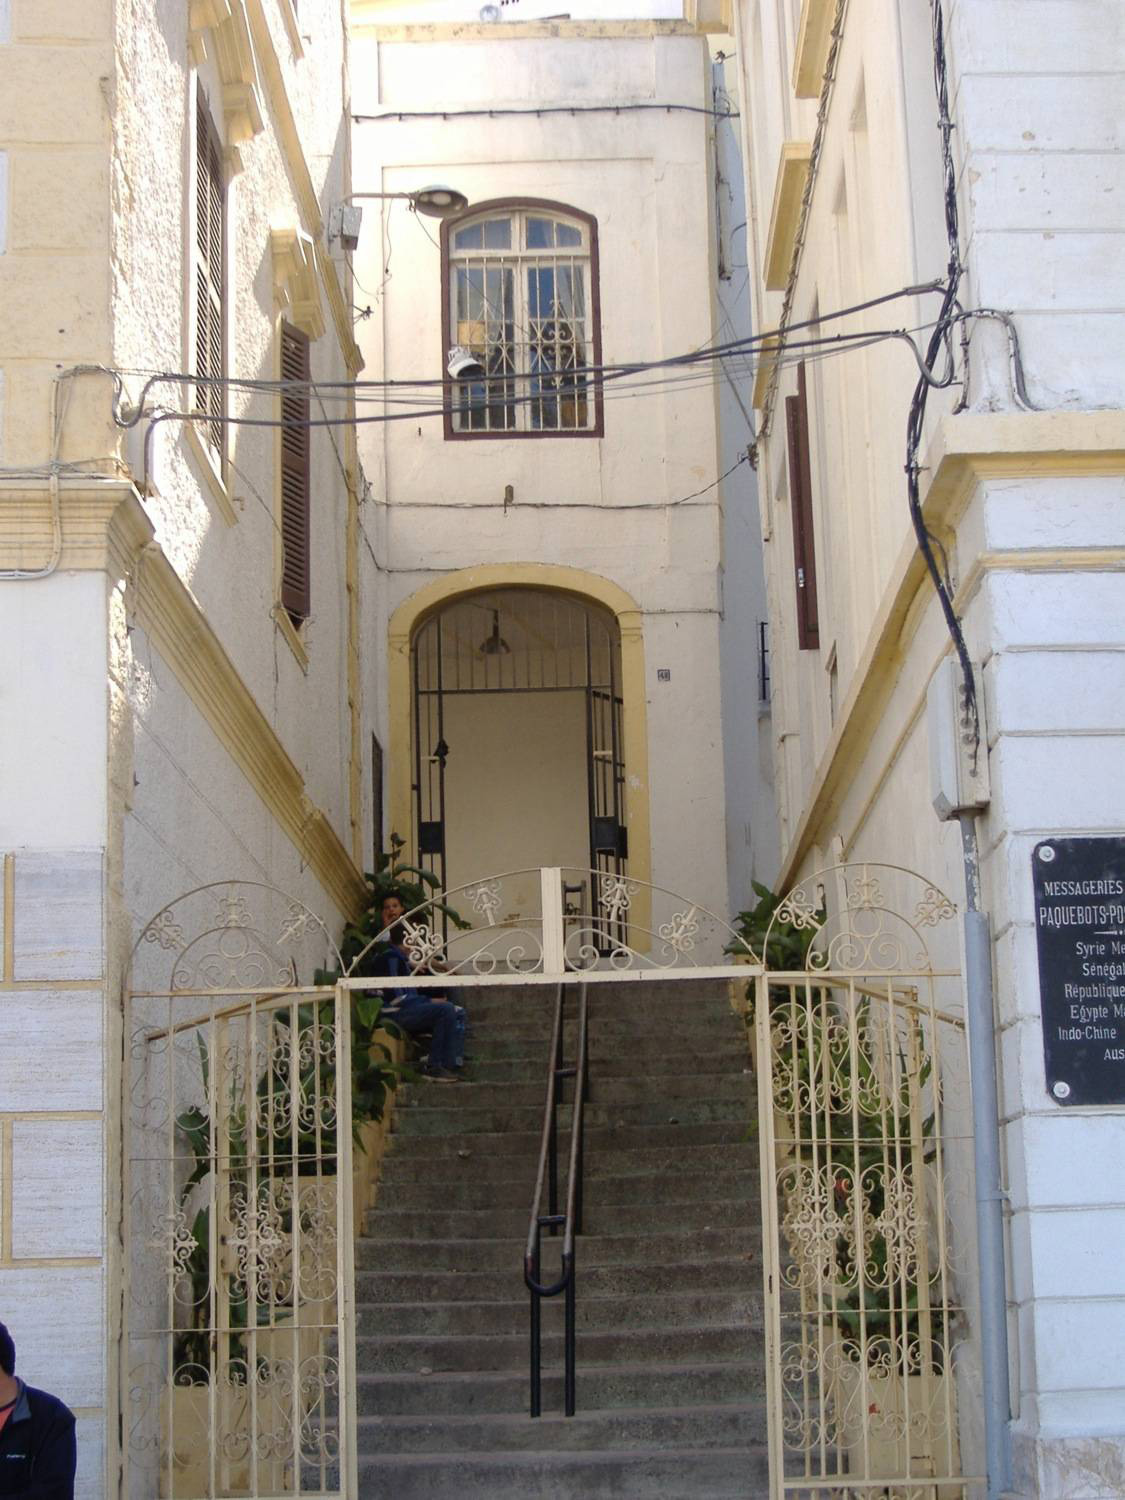 Full view of the stairs to the terrace from the avenue